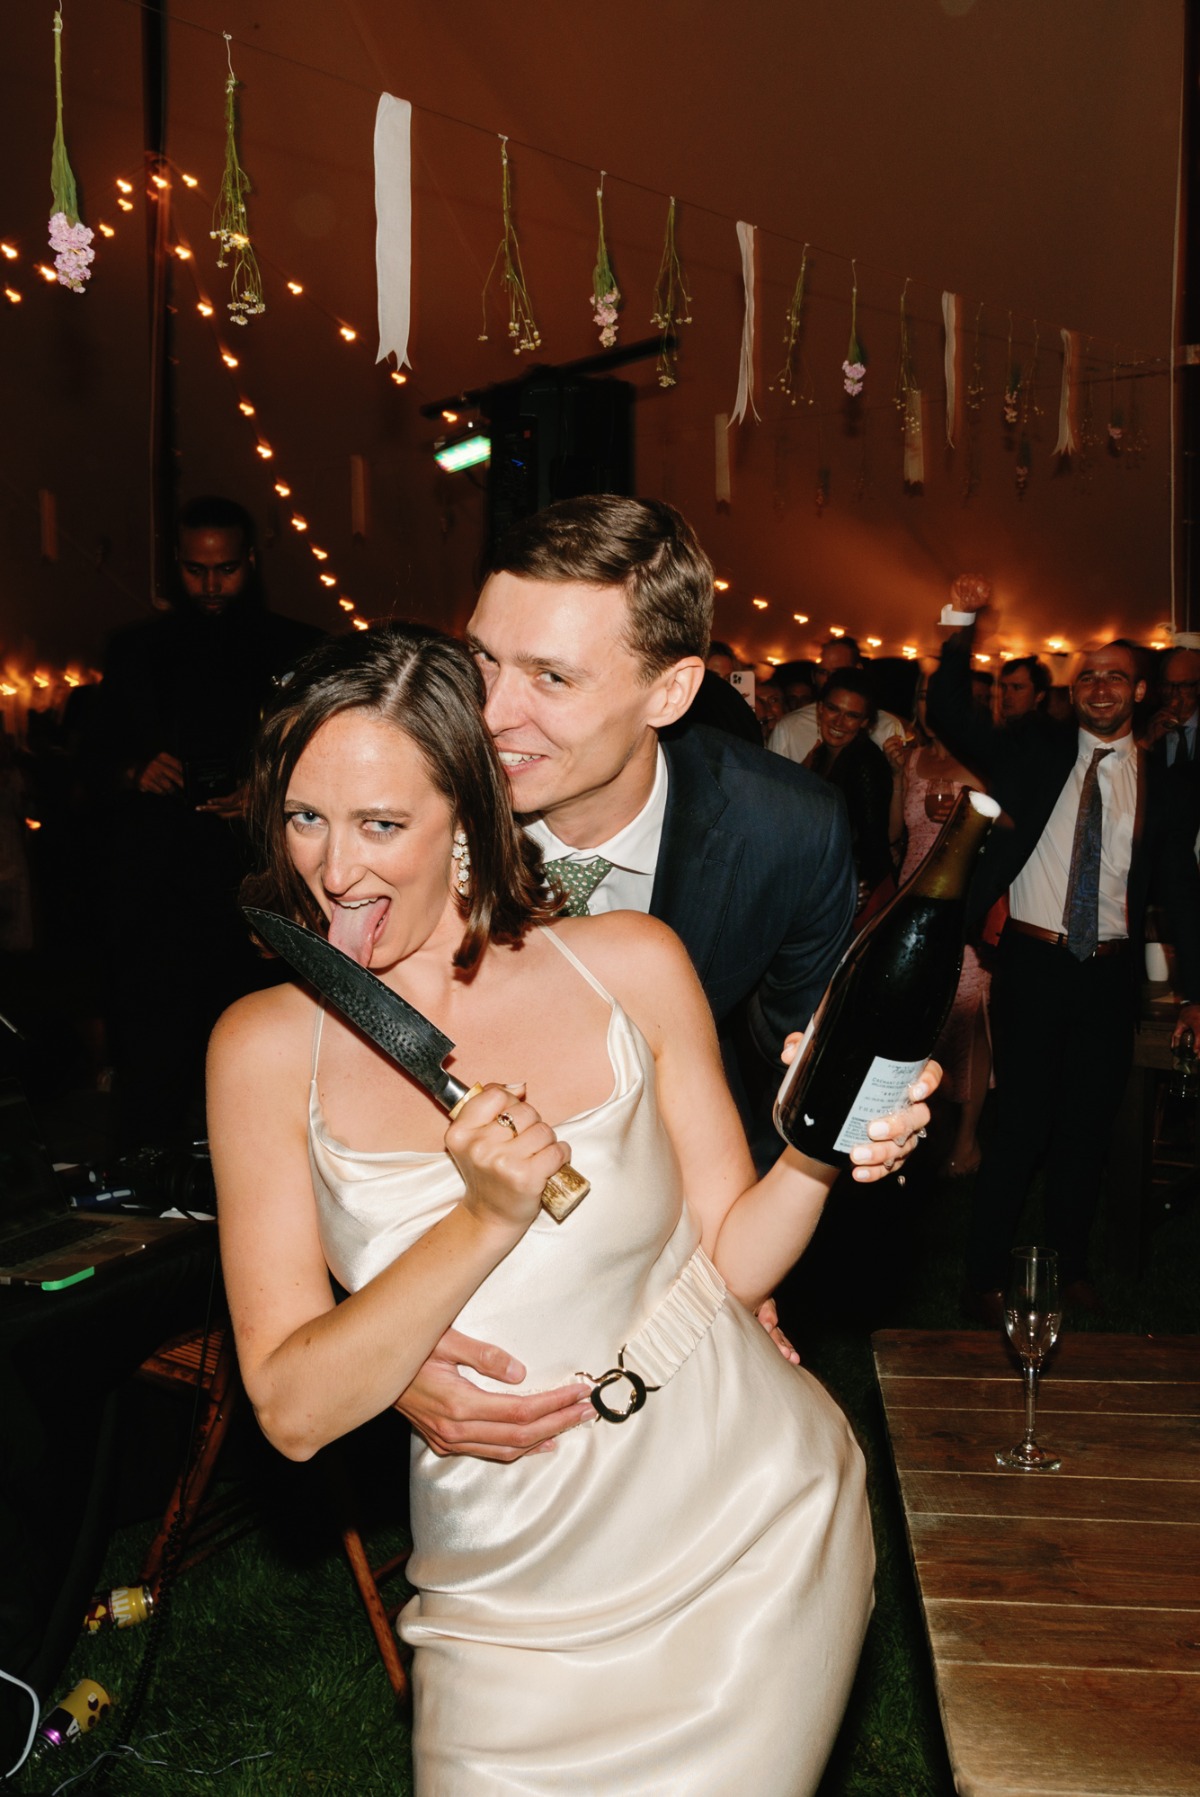 Playful bride and groom popping champagne